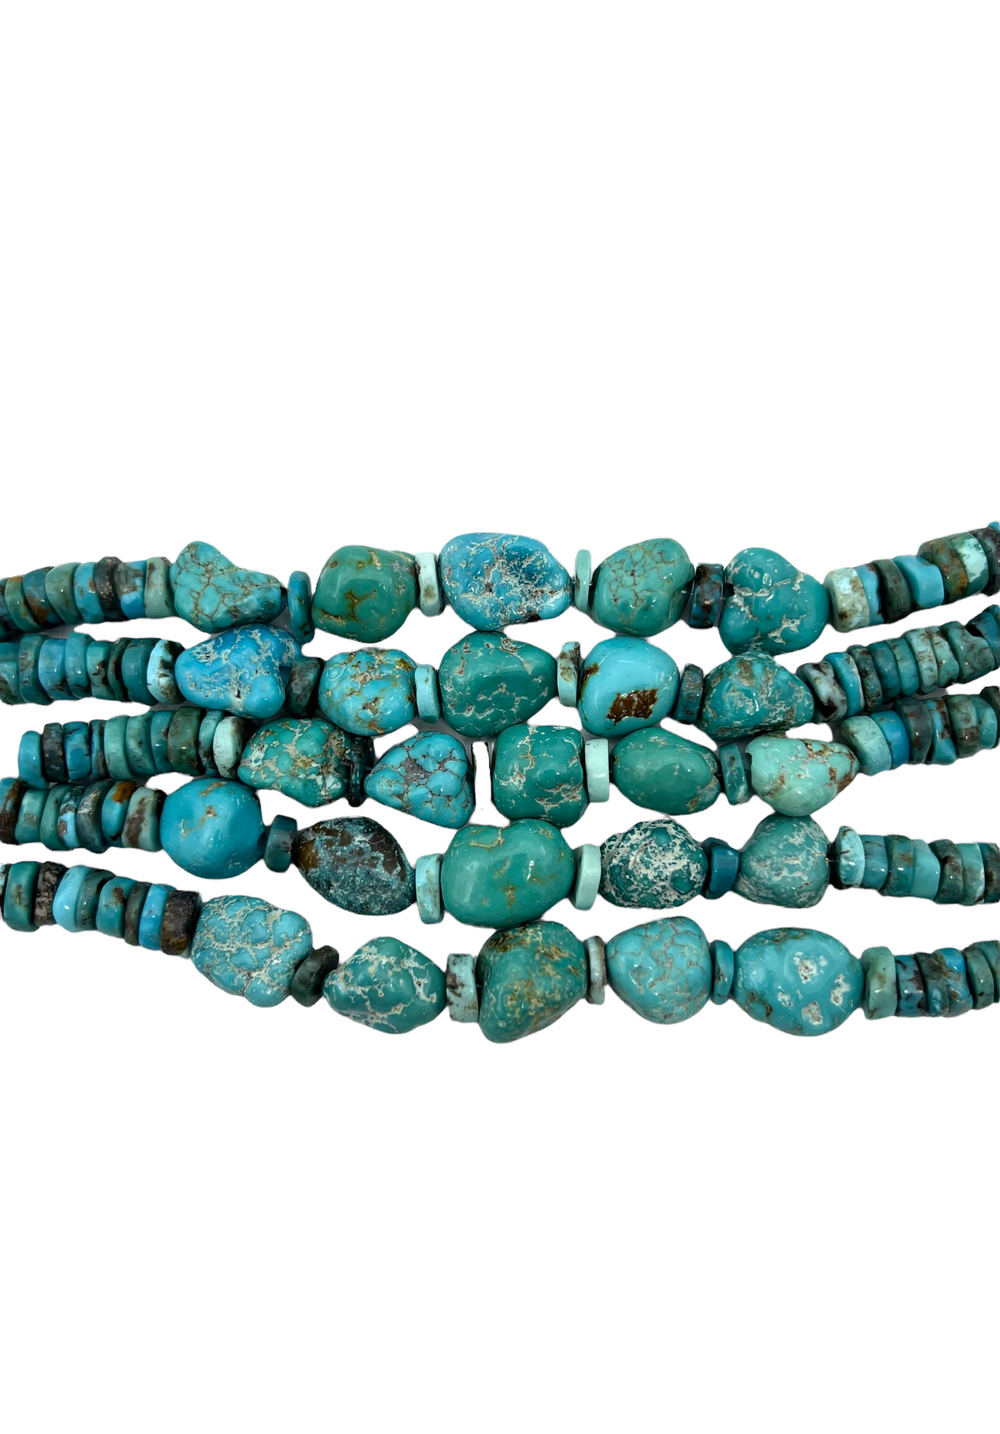 Sierra Nevada (Nevada) Turquoise Mixed shape and Nuggets